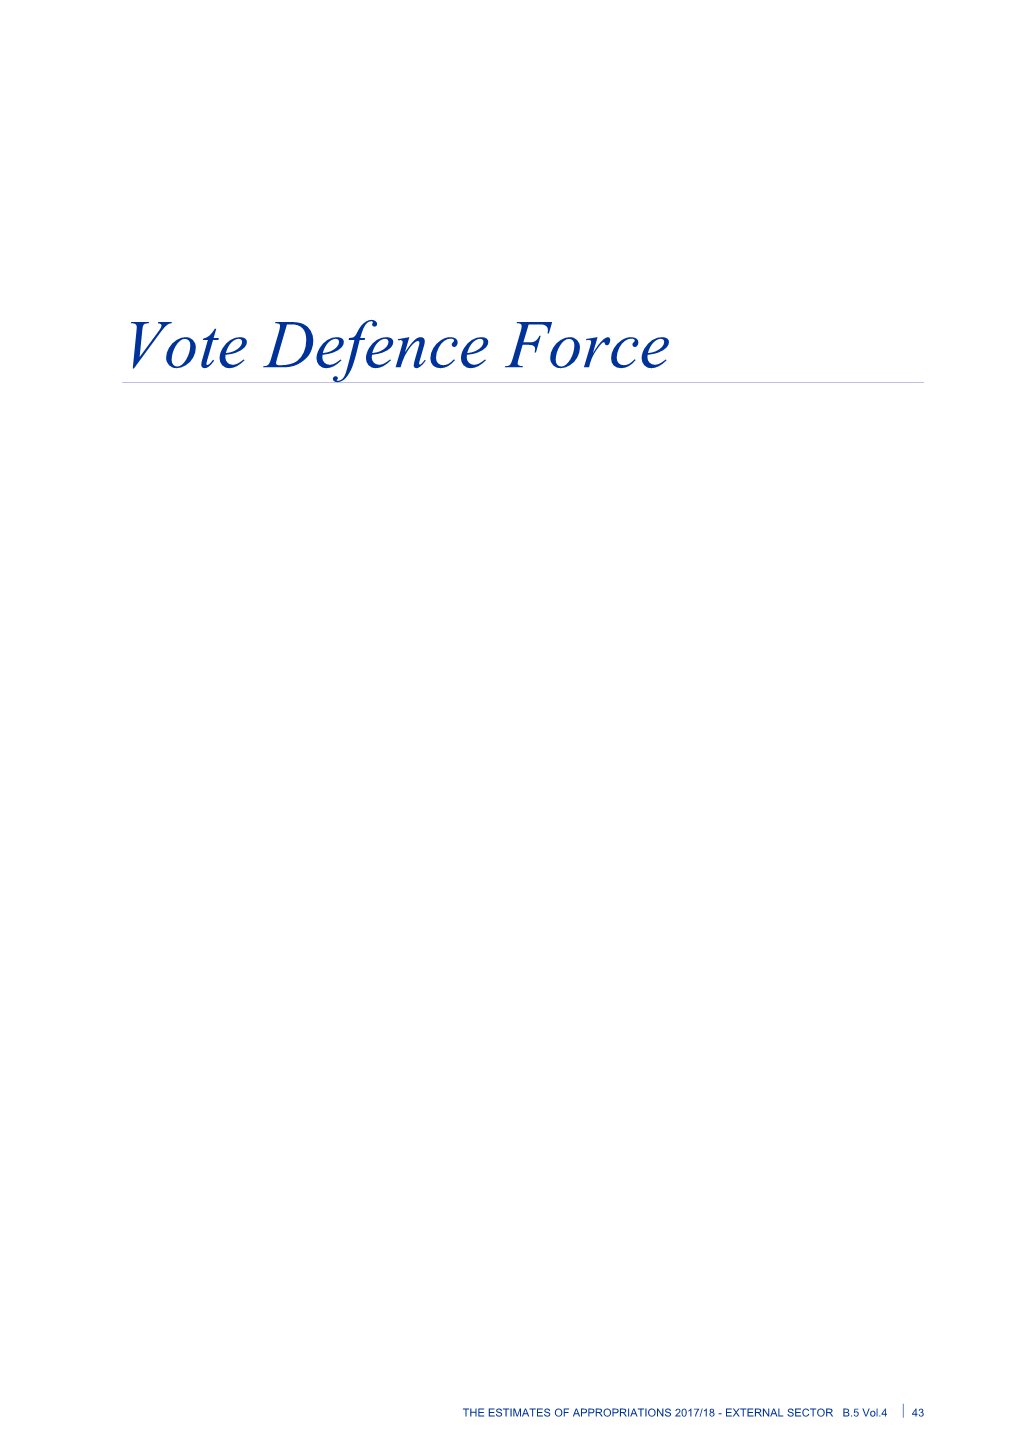 Vote Defence Force - Vol 4 External Sector - the Estimates of Appropriations 2017/18